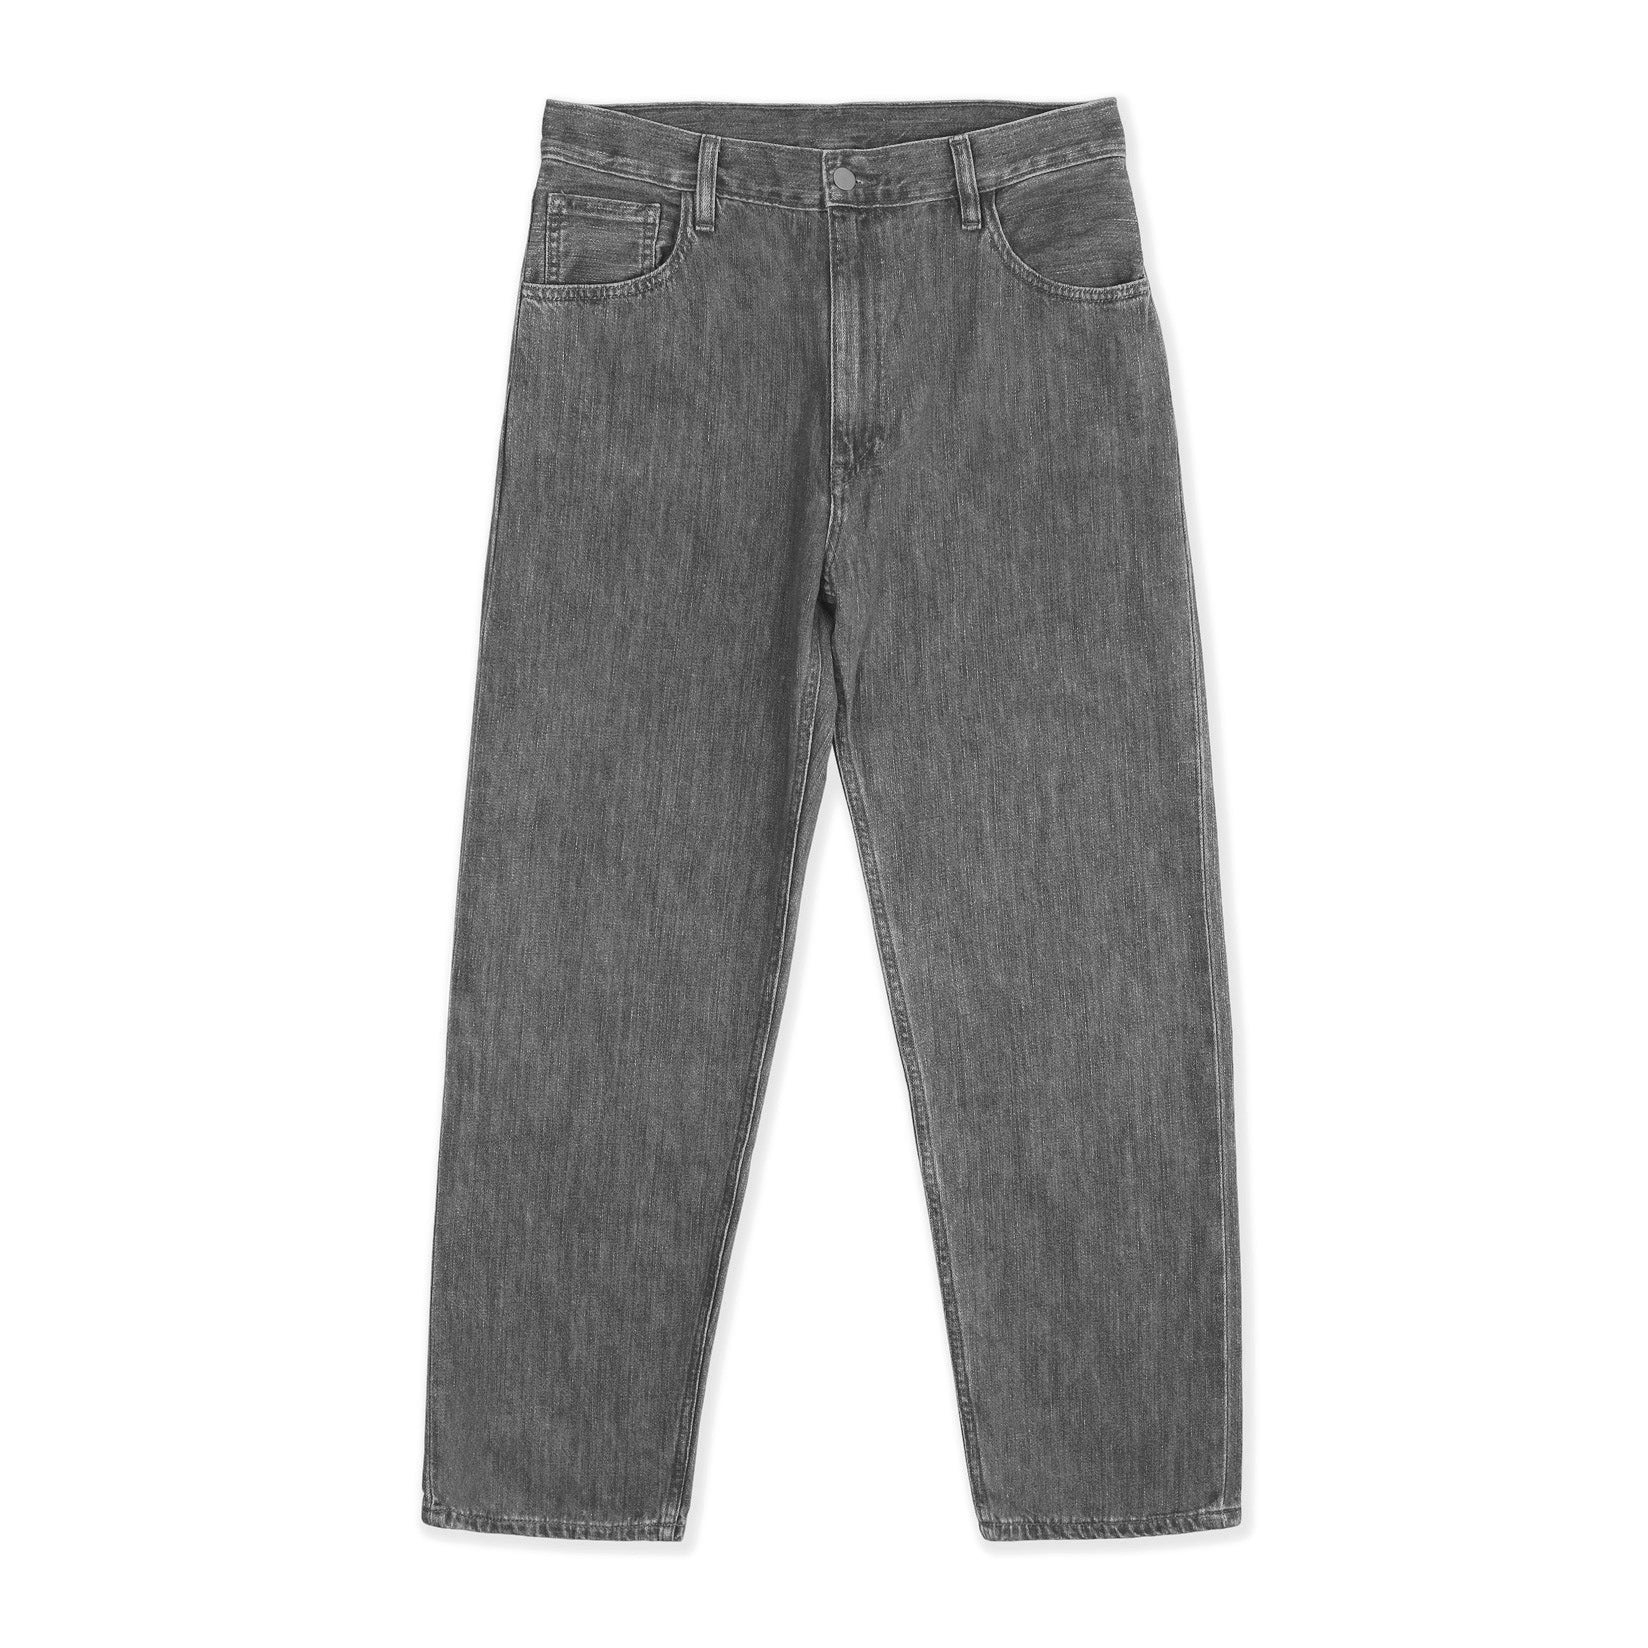 Relaxed Fit Organic Jean in Washed Grey Selvedge Denim